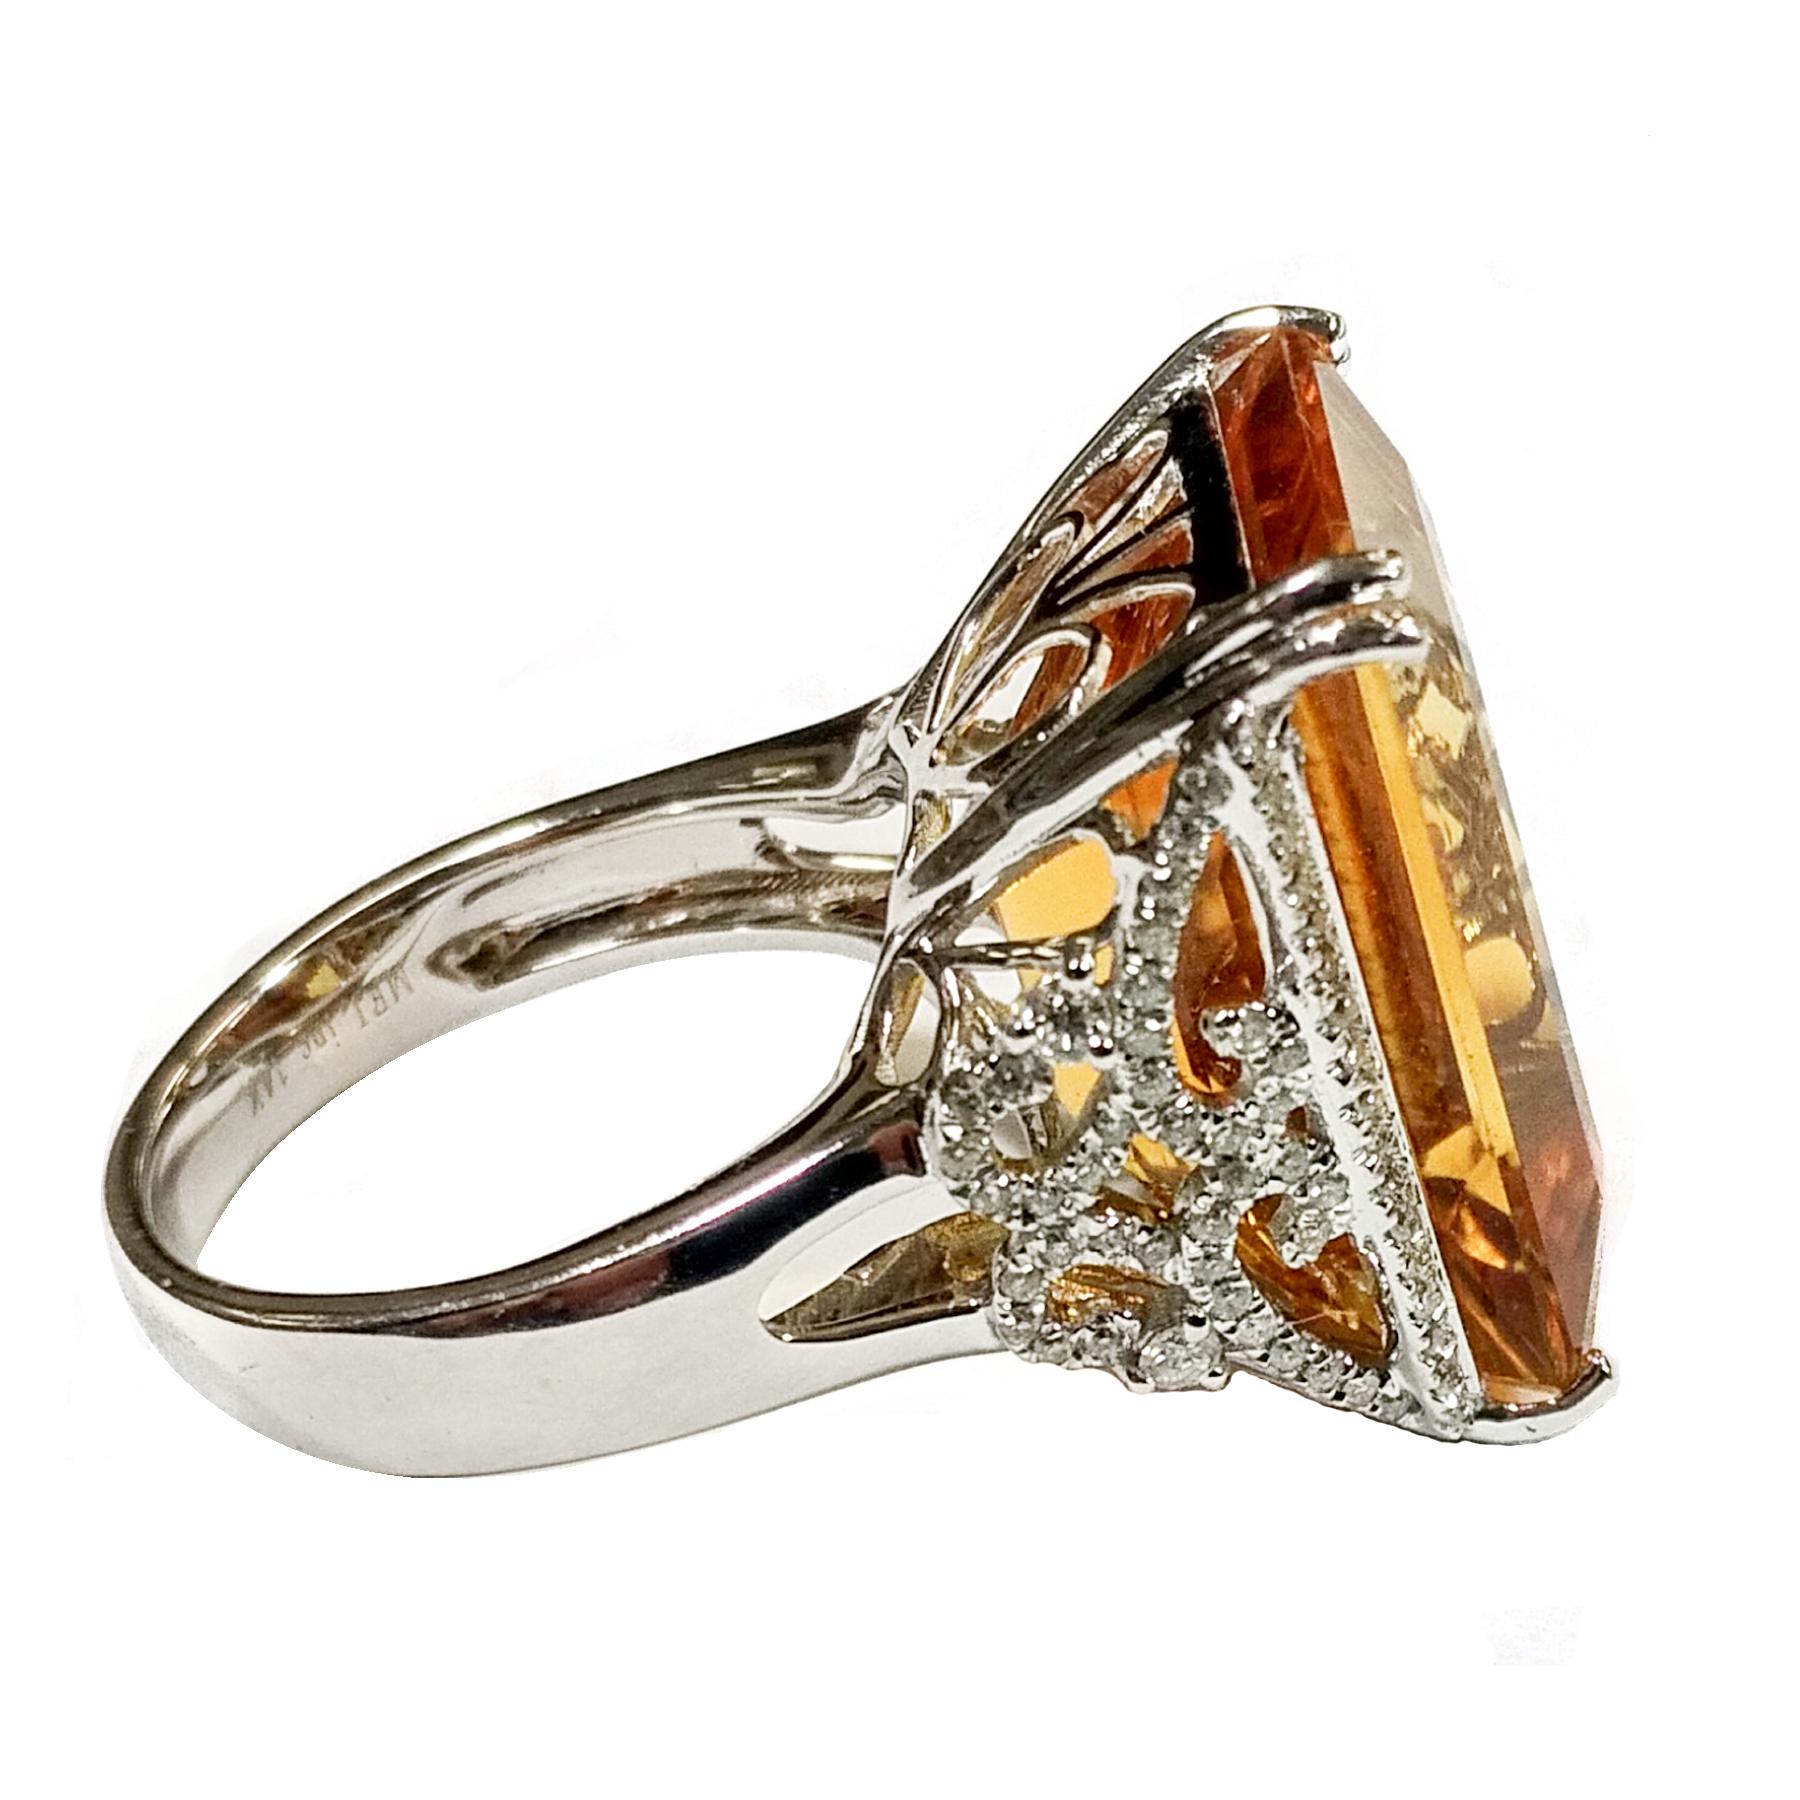 Citrine 20.85 Carats White Gold Cocktail Ring 1